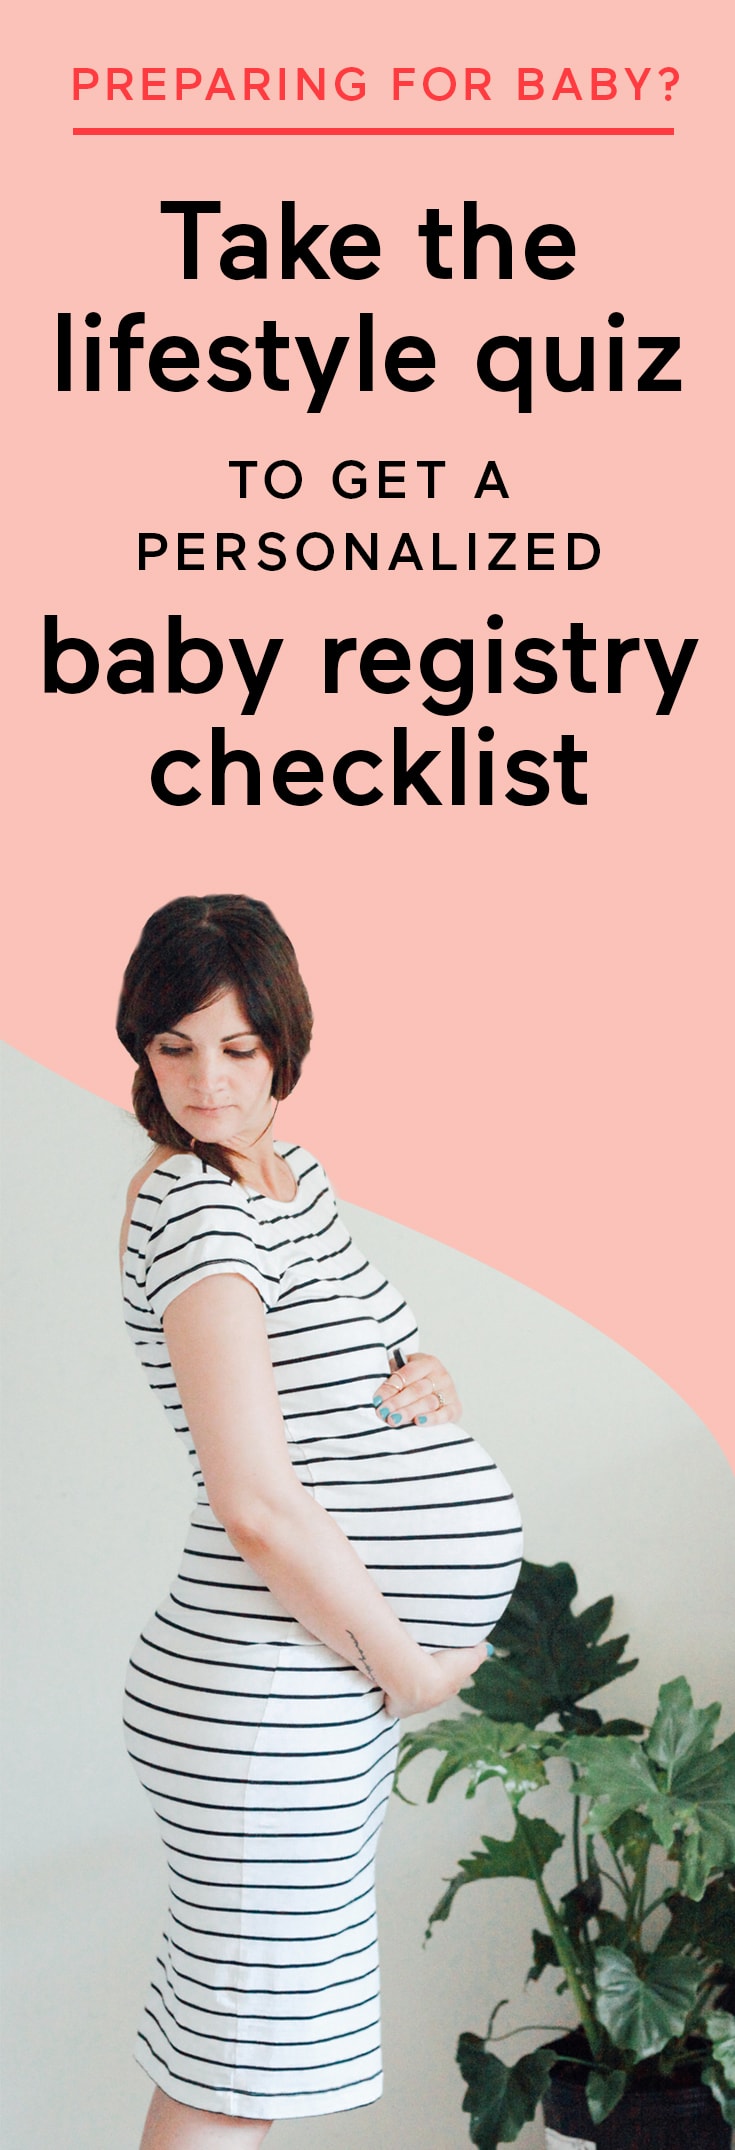 Get a personalized baby checklist with short quiz about where you live, budget, & parenting plans. See what your family actually needs for baby, not what stores want to sell you.